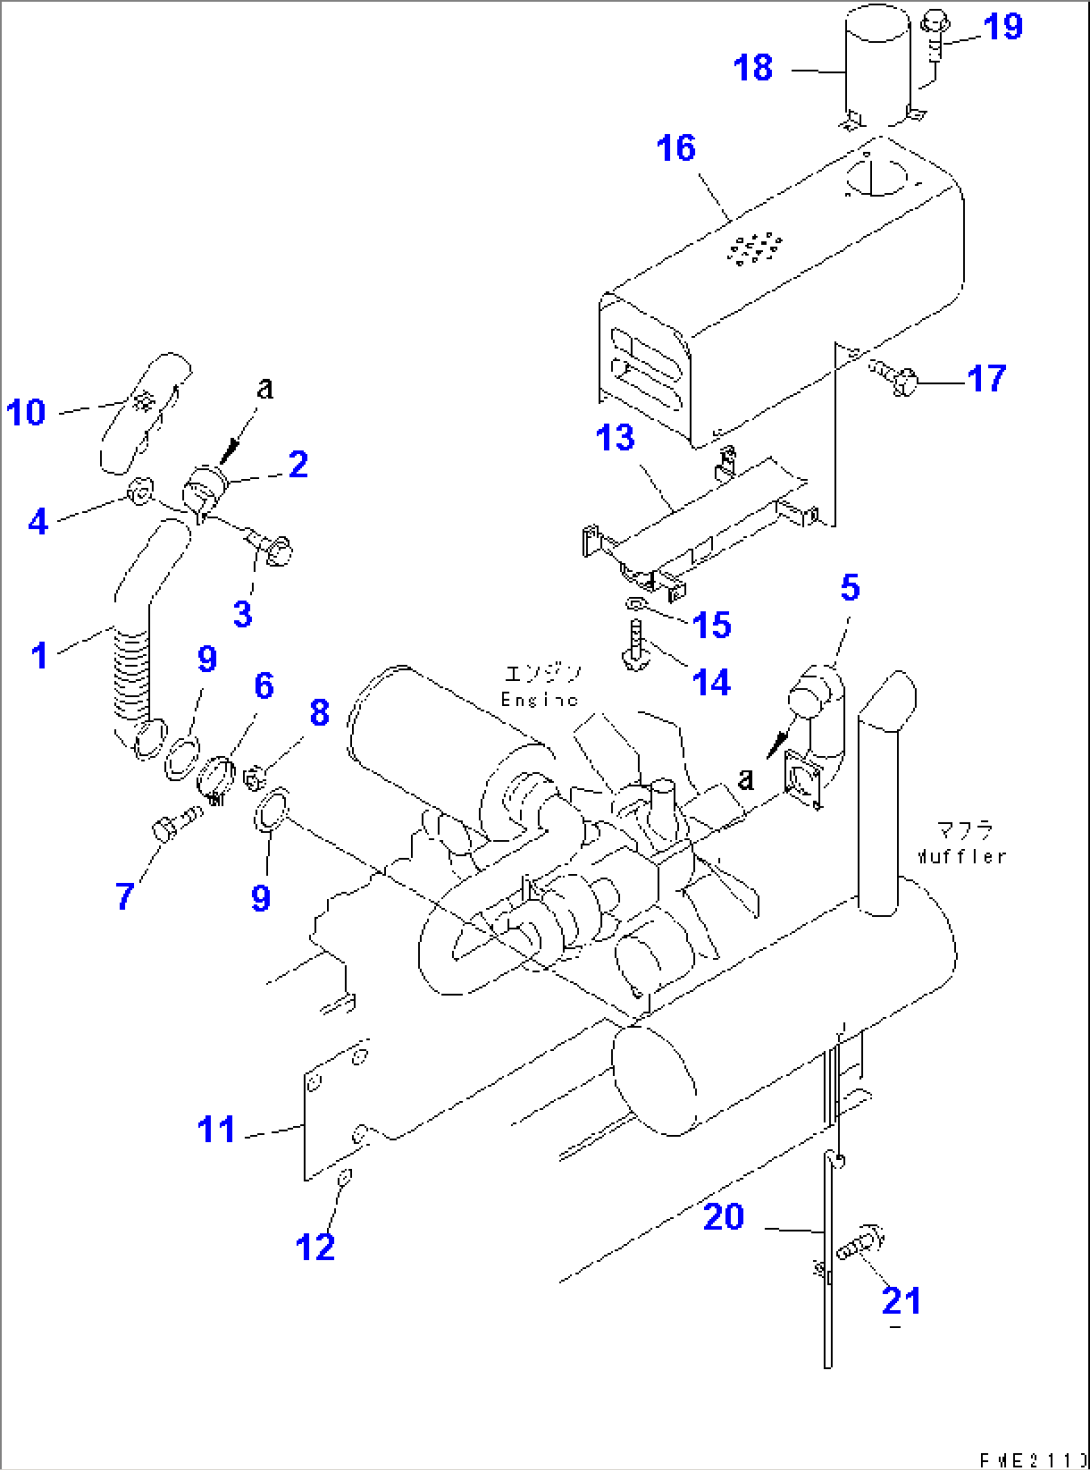 EXHAUST SYSTEM(#10001-10300)